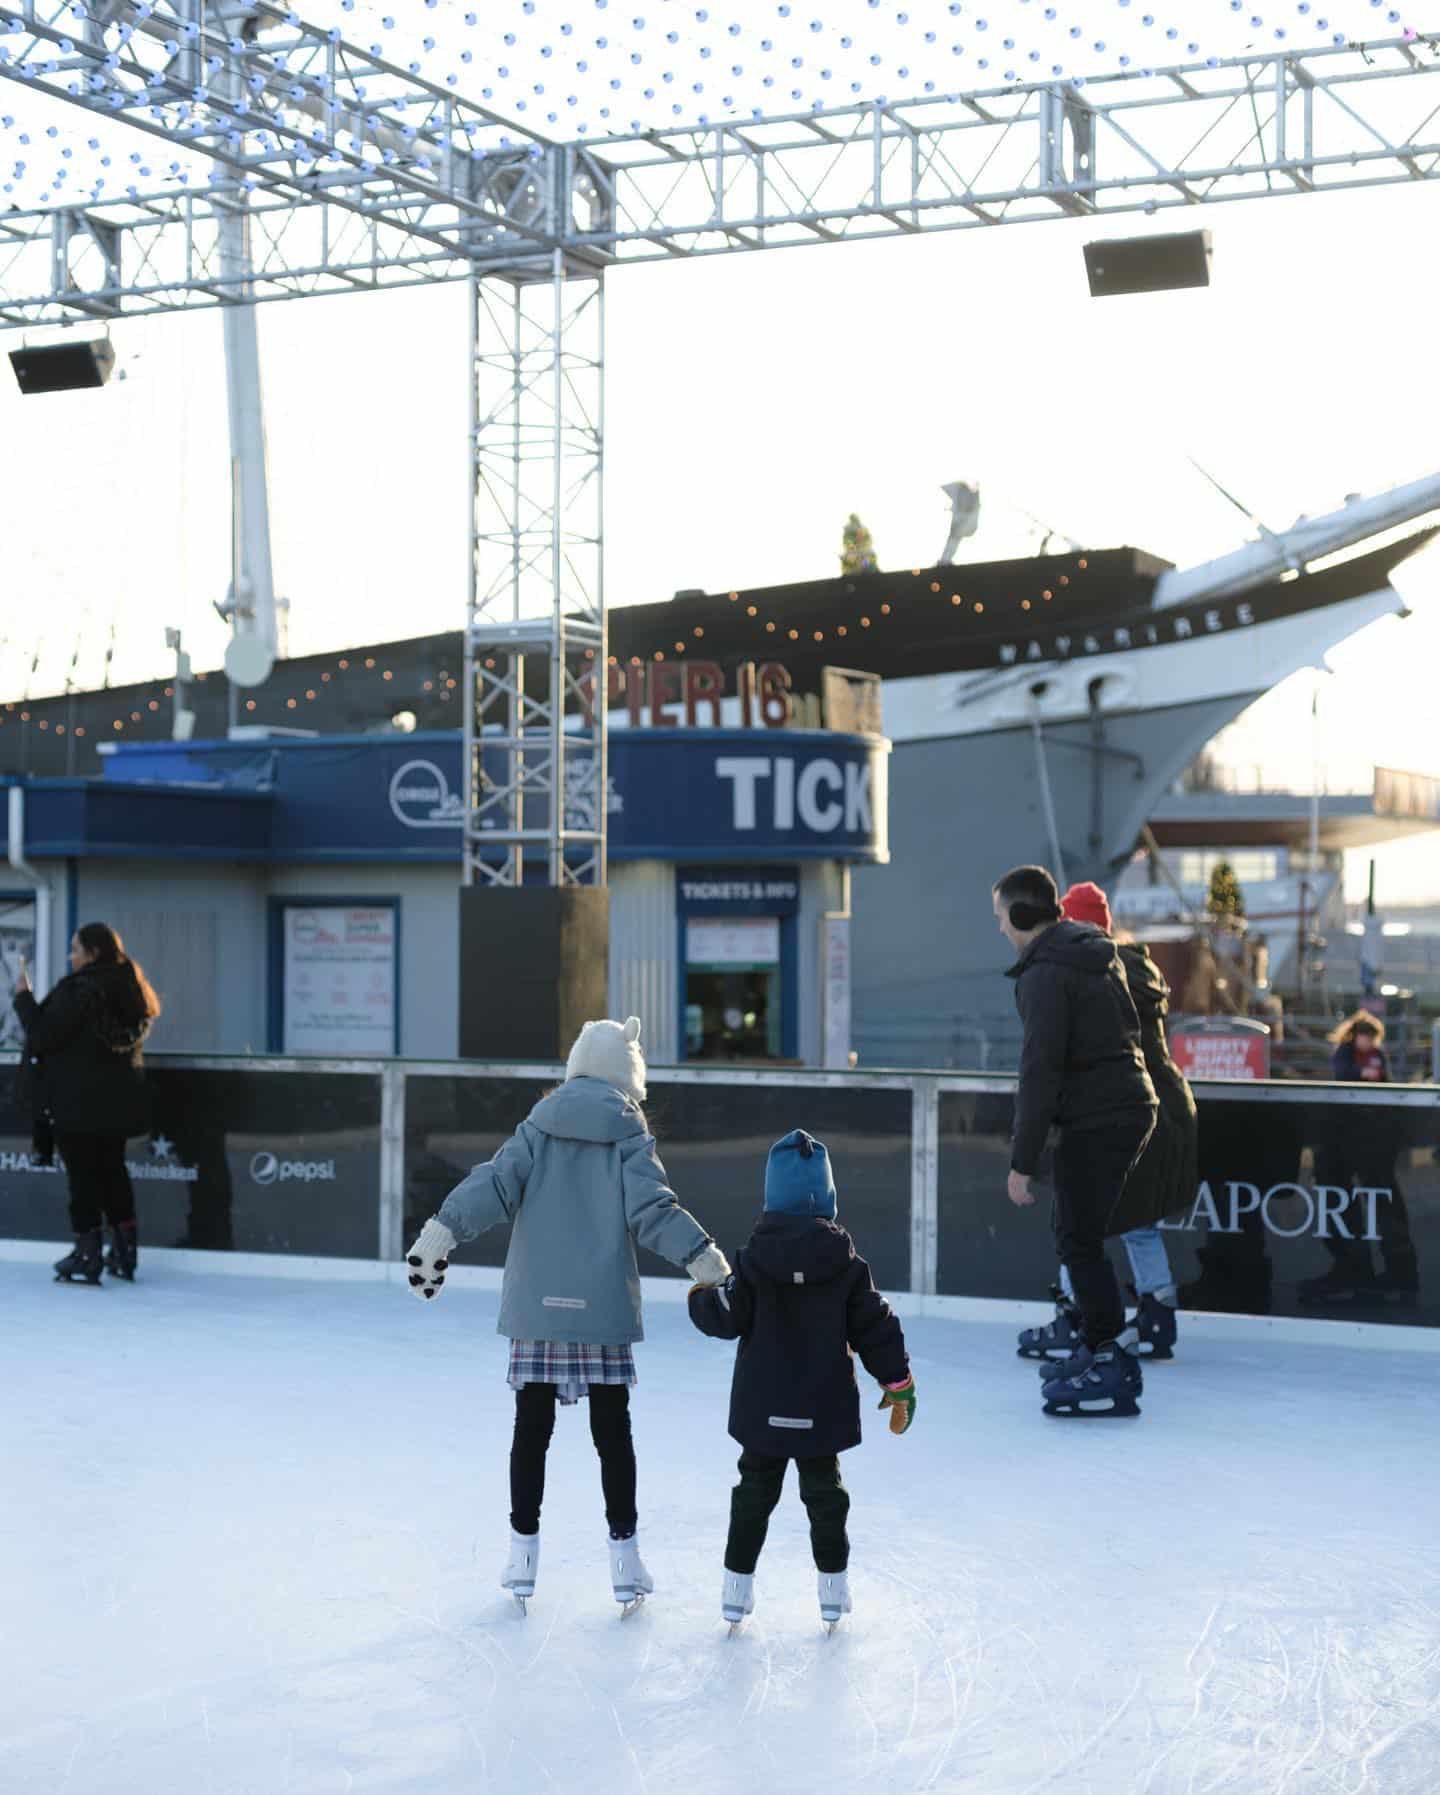 Downtown winter wonderland. Family-fun for everyone. Skate into 2023 on the ice ⛸️ Book now ➤ link in bio.